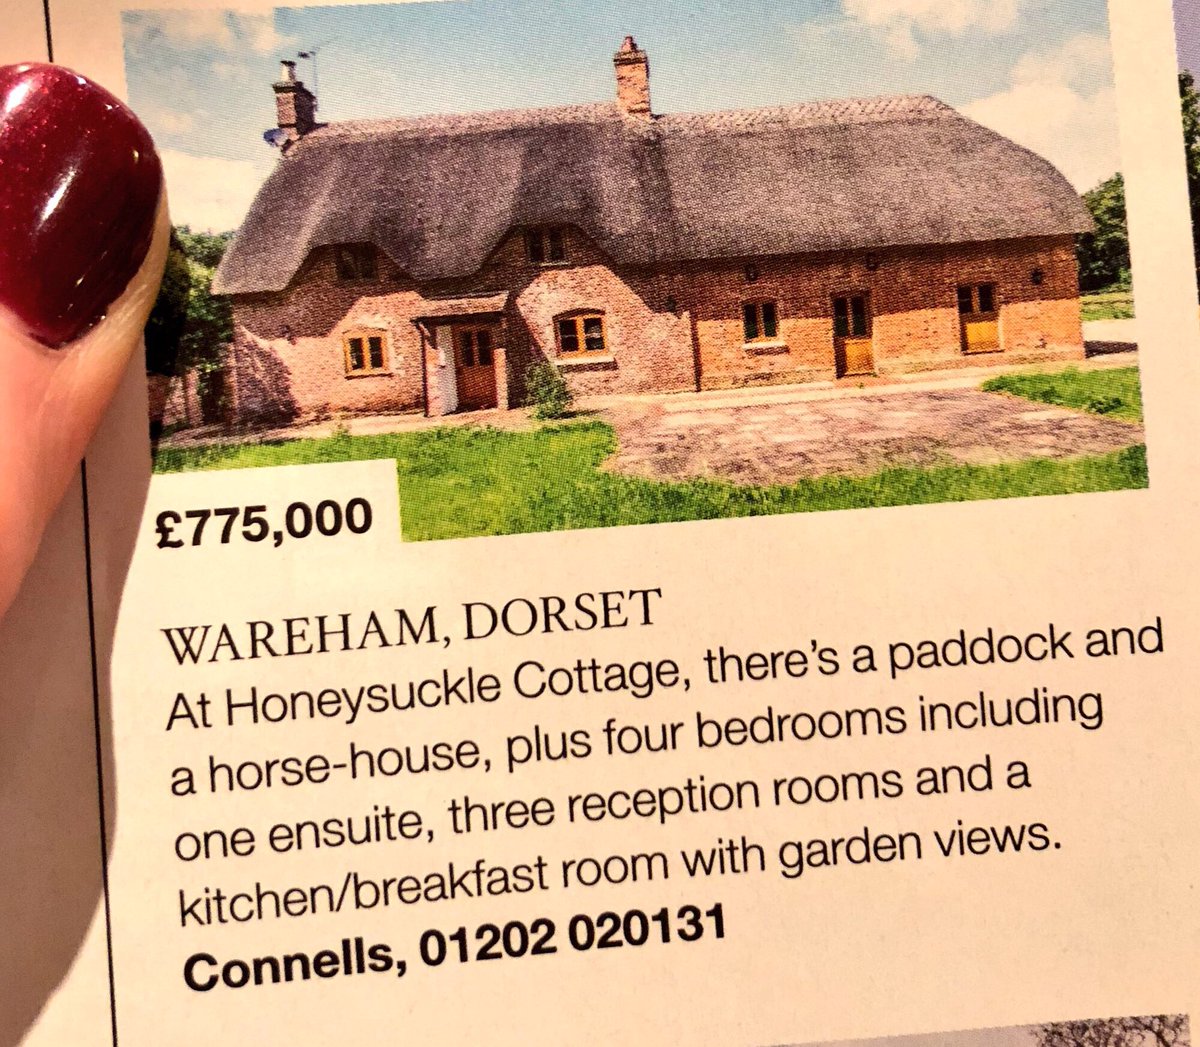 Estate agent: Ange, what’s that thing called where people put horses? There’s one in the paddock at Honeysuckle Cottage. 
Ange: *long pause* a horse house. 
Estate agent: great, thanks.